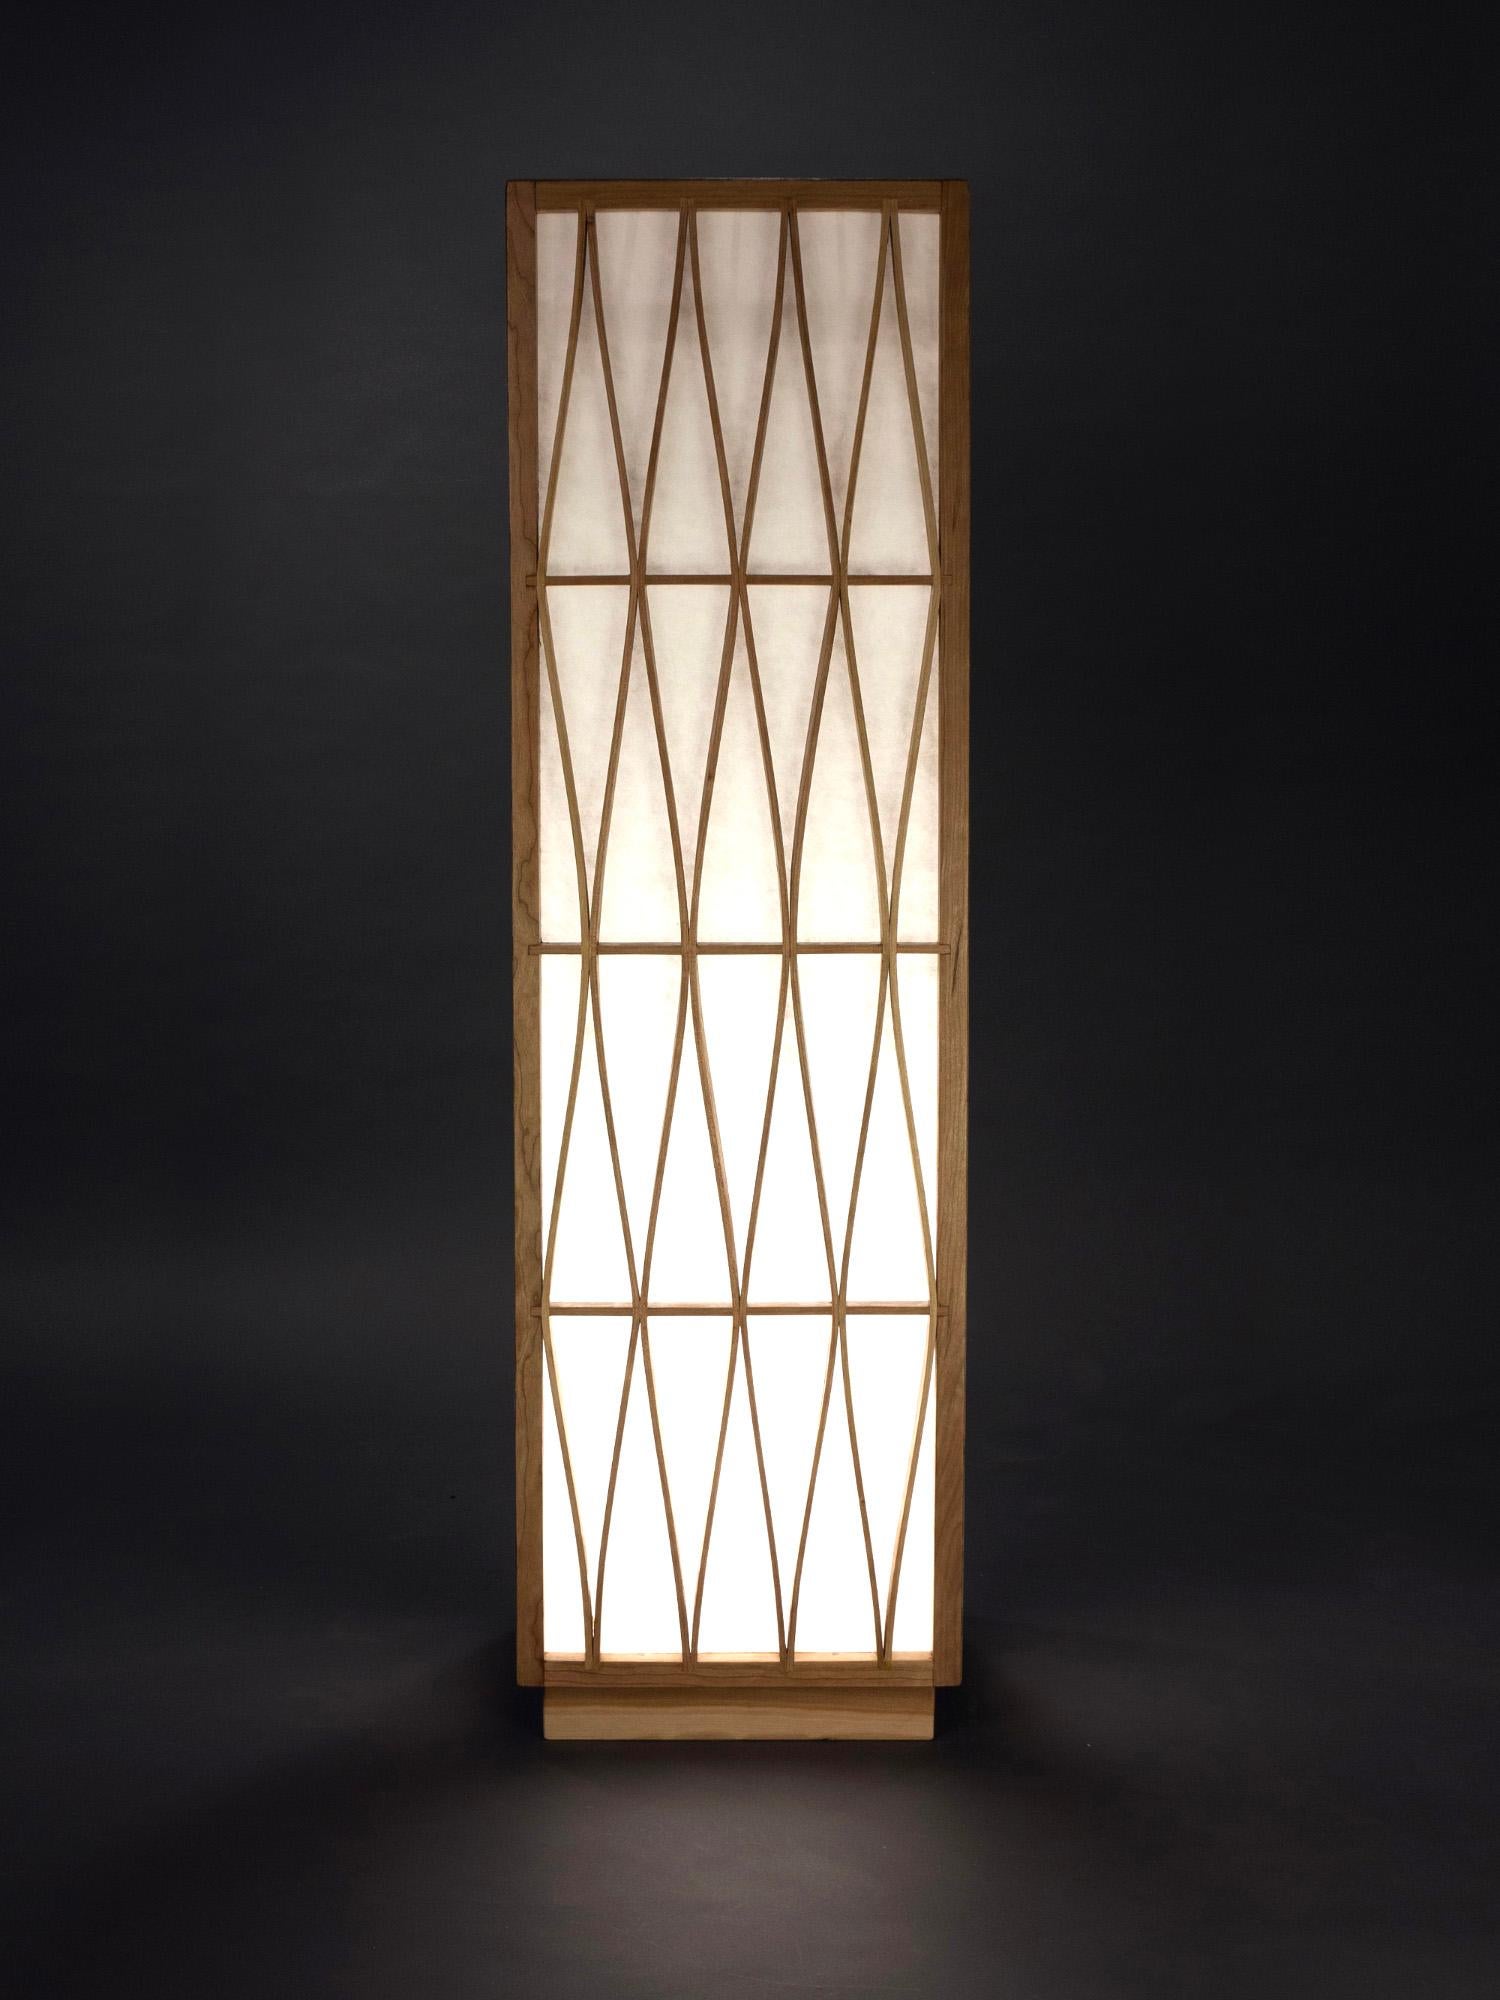 The Skyscraper Floor Lamp stands 4 feet tall with an external architectural structure made from cherry wood. Its external frame provides strength, while protecting the internal Shoji paper screens. Shoji is a traditional Japanese paper made from